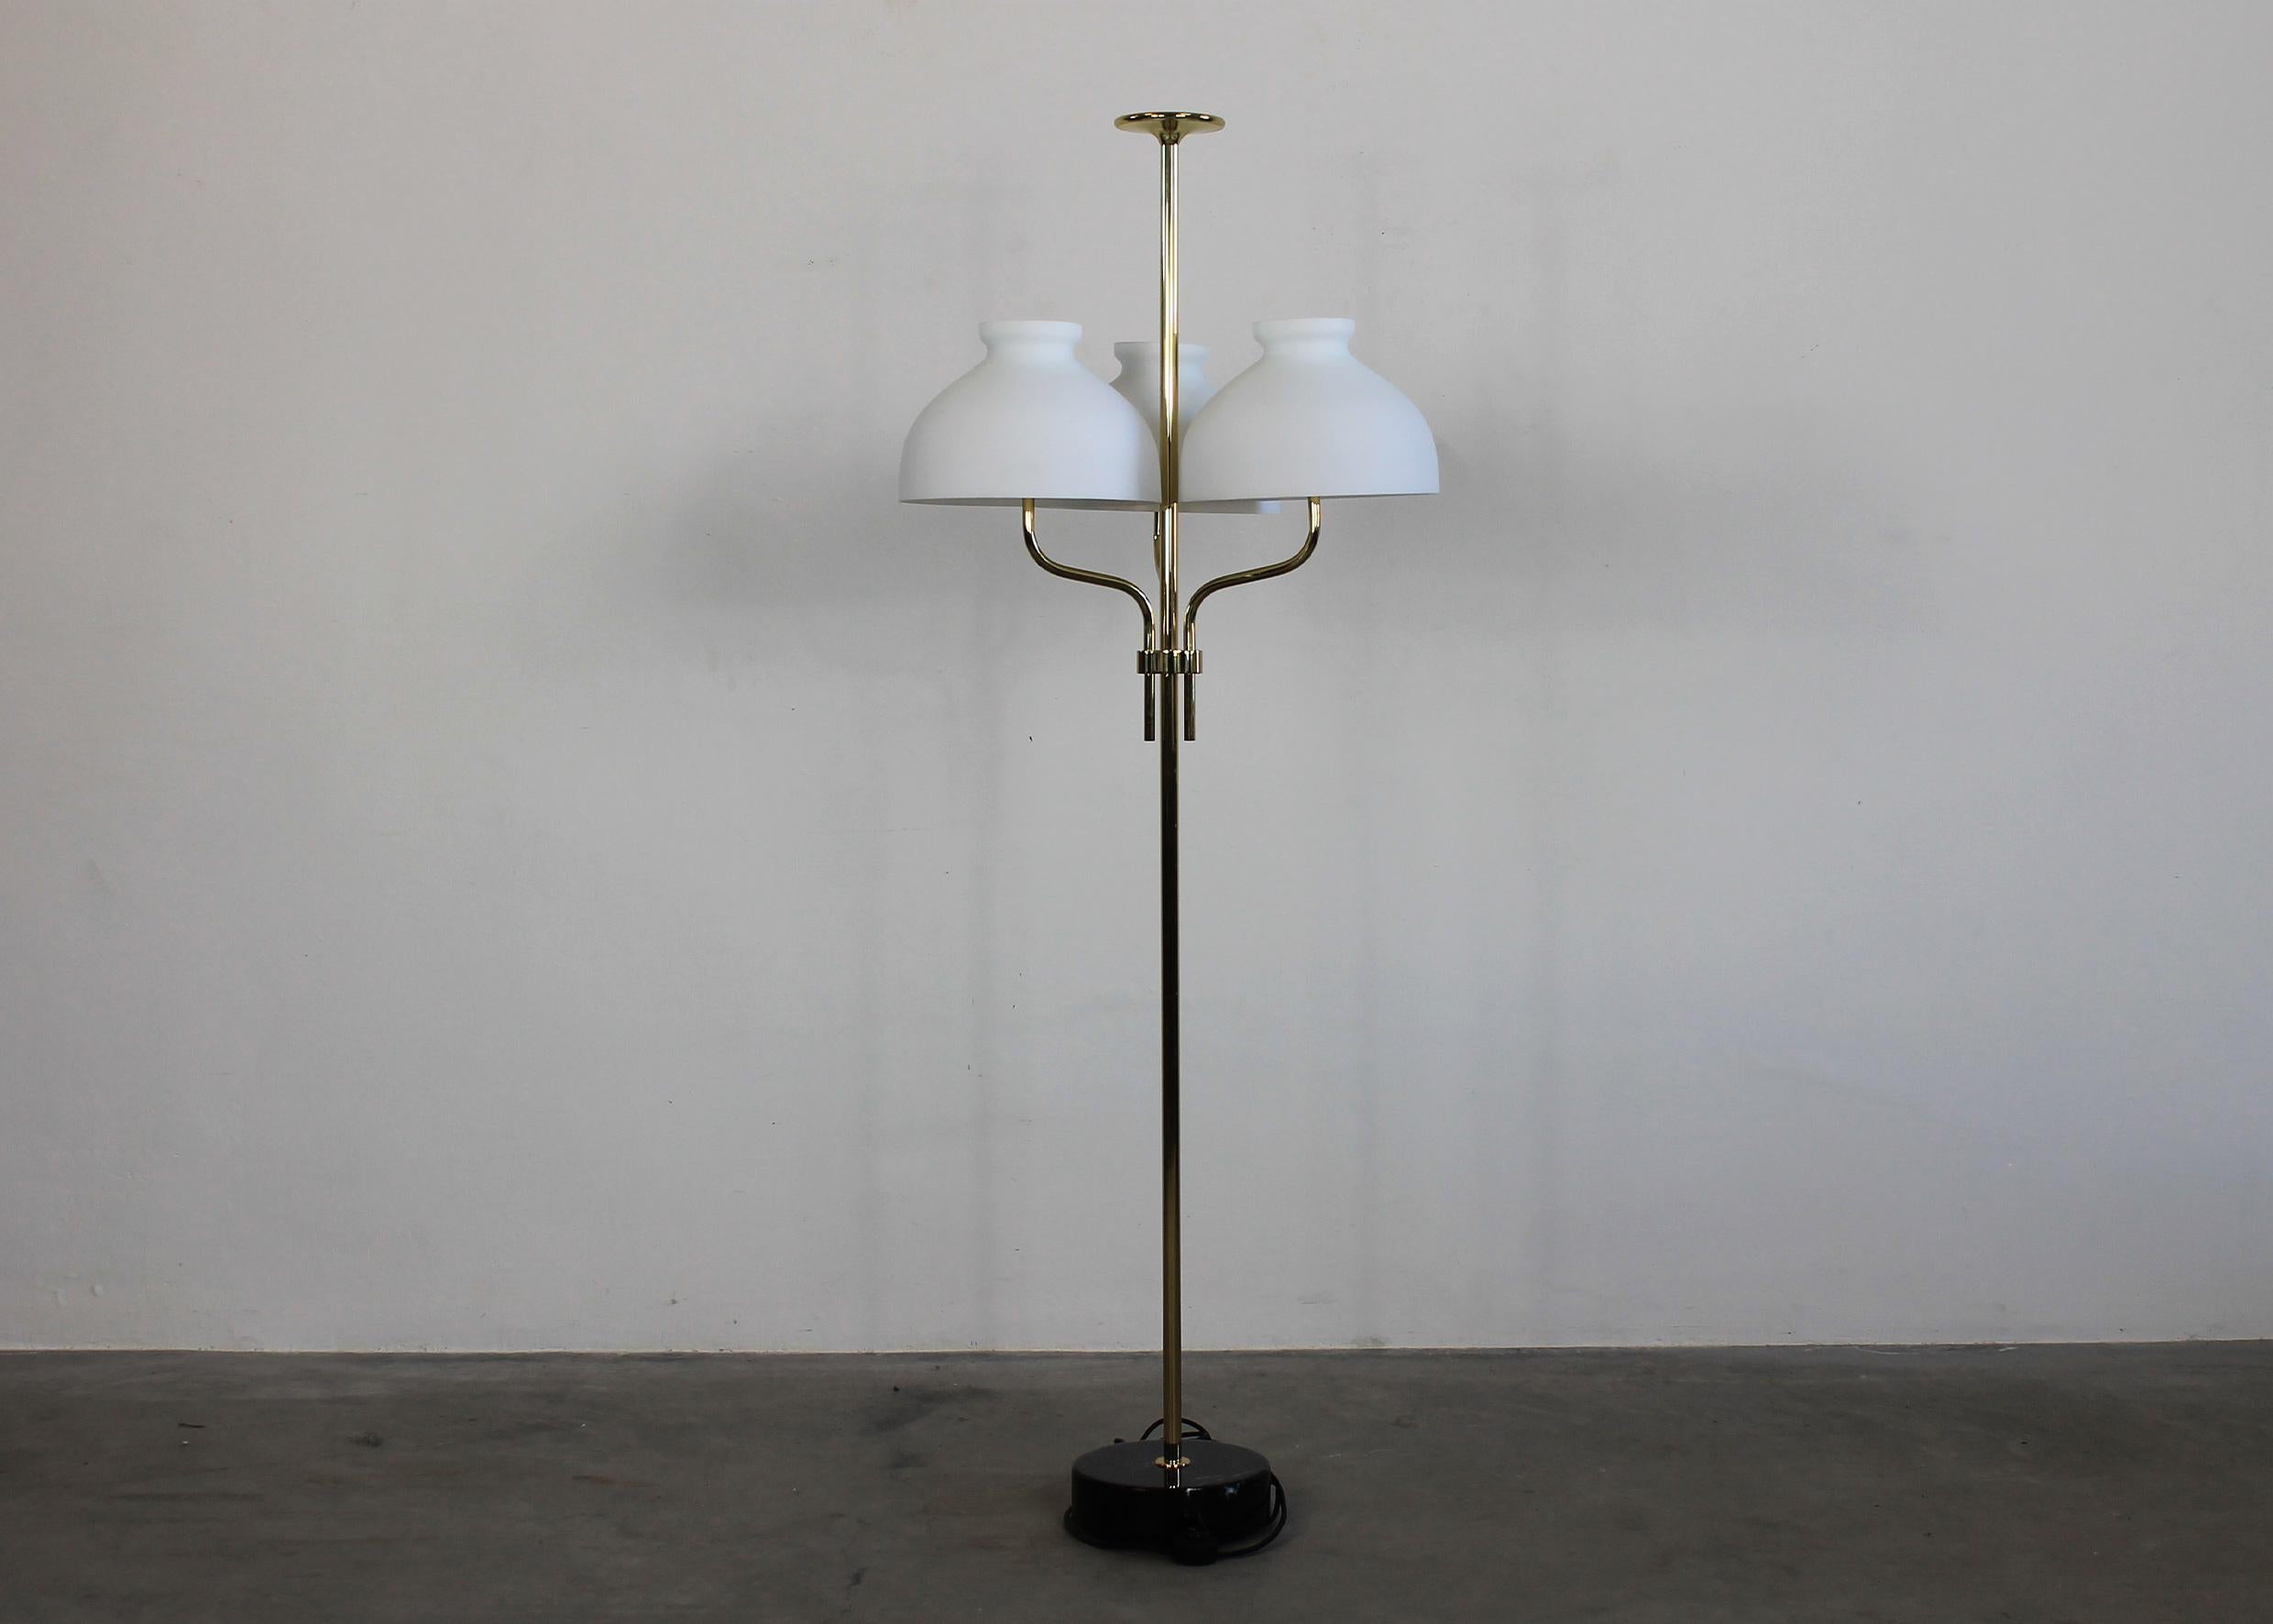 Arenzano floor lamp with a brass stem, a round-shaped base in black marble, and three lampshades in opaline glass. 

This lamp has an elegant structure in tubular brass, curved and split on the top side to hold three delicate opaline lampshades,